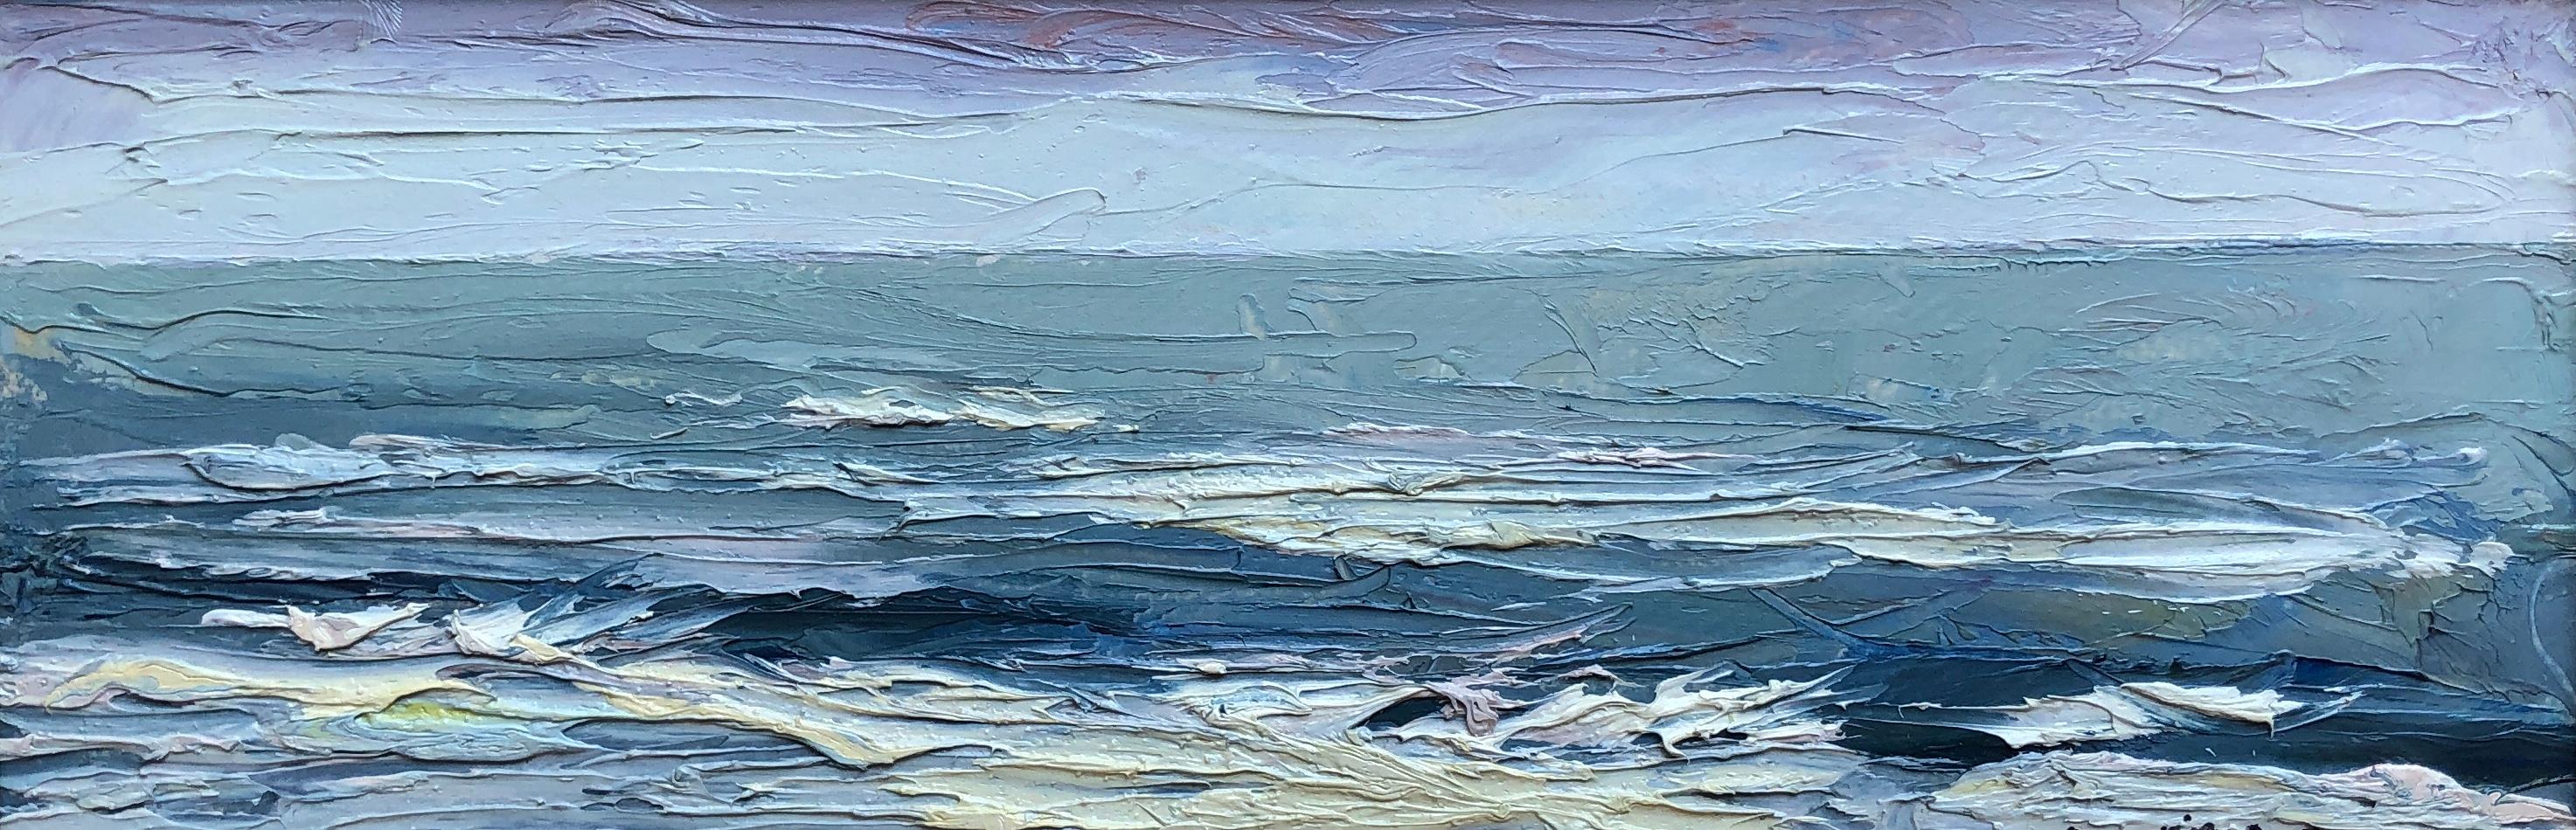 Nelson White Landscape Painting - The Waves 09.14.2017